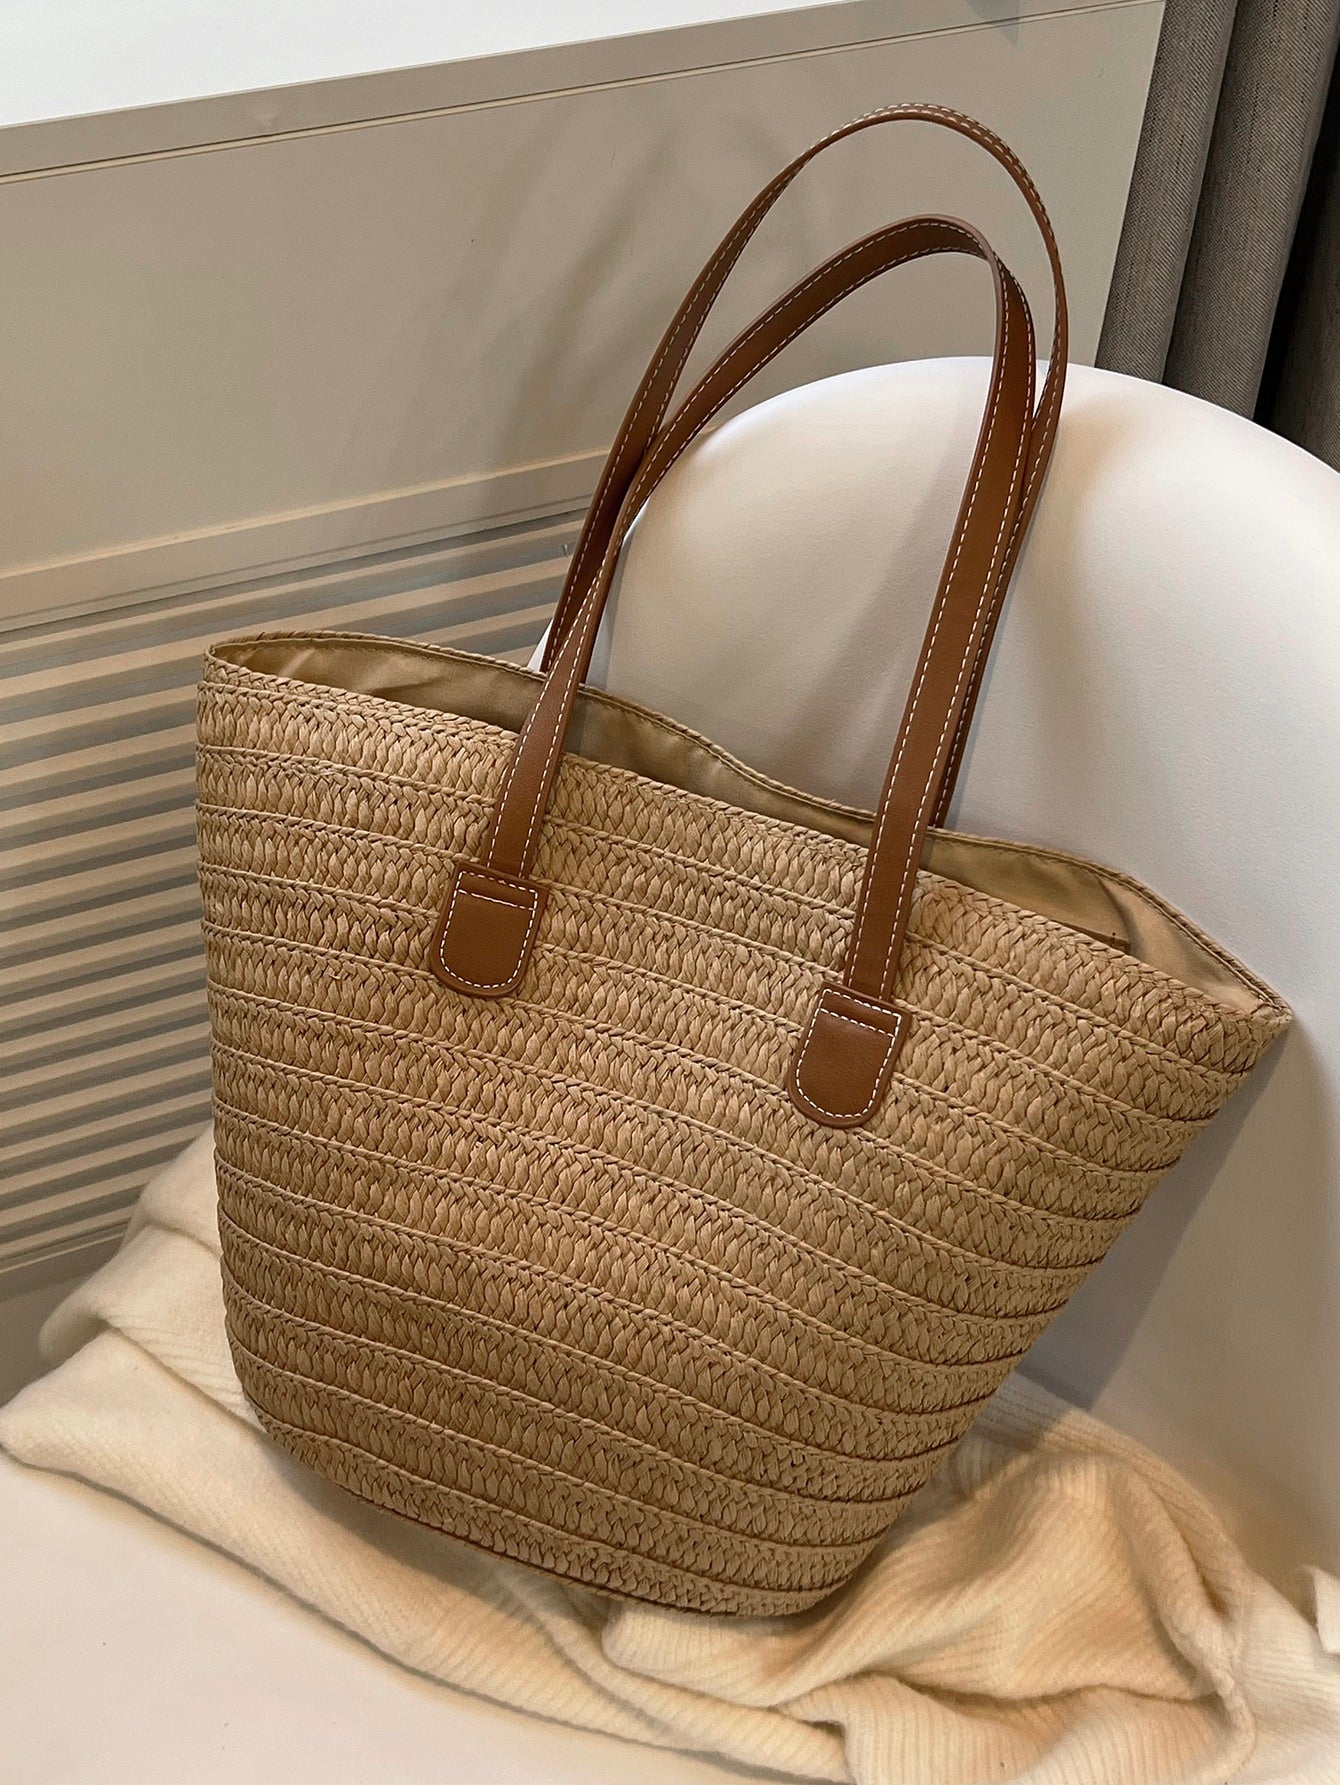 Woven Solid Color Shoulder Tote Bag For Women, Fashionable Trendy Handbag For Casual And Chic Style, Large Capacity